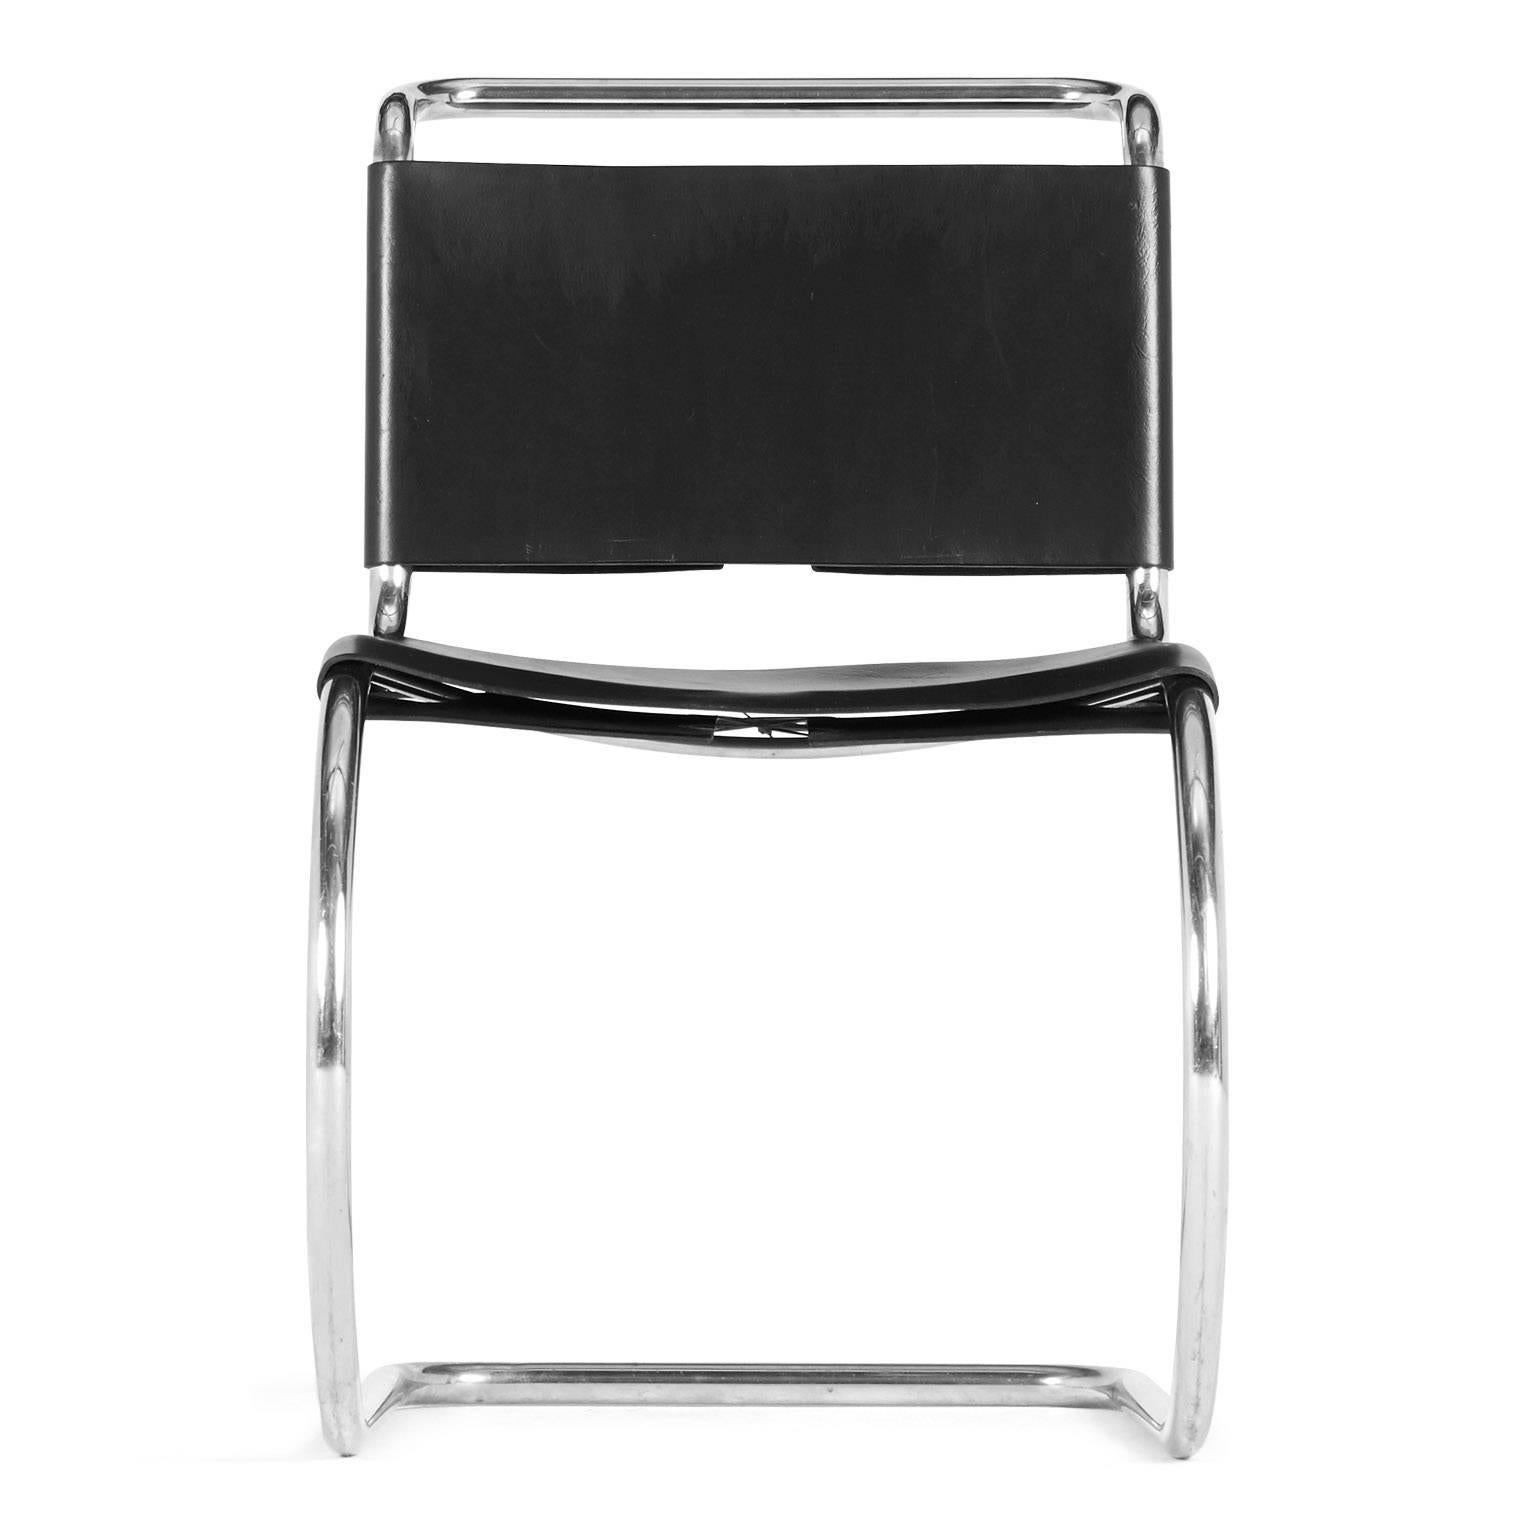 Designed by Ludwig Mies van der Rohe for Knoll International, this black leather side chair with laced up back and seat detail are stamped October 12th 1979. The tubular steel frame in polished chrome facilitates a contemporary appeal. The modern